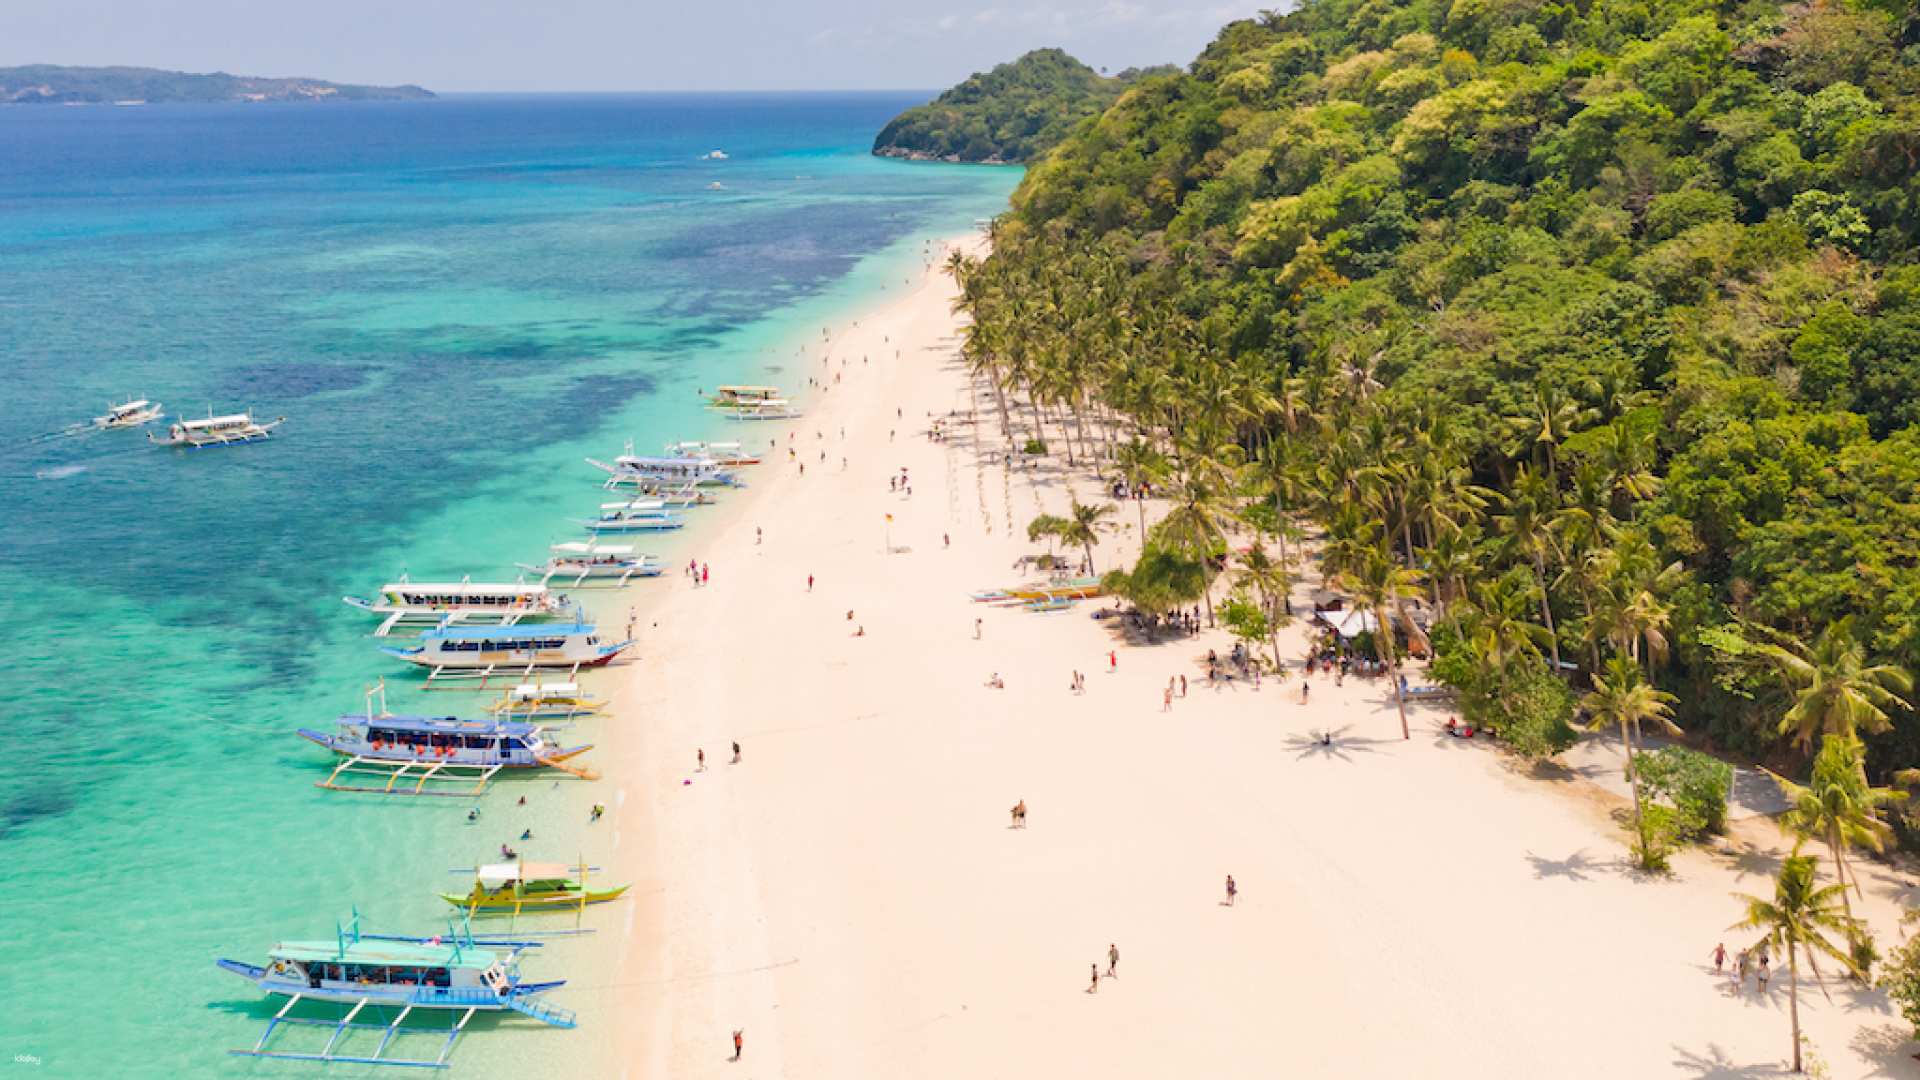 [Fullboard Package] 3-Day All-In Boracay Tour Package With Airport Transfers, Hotel and Island Hopping Tour | Philippines